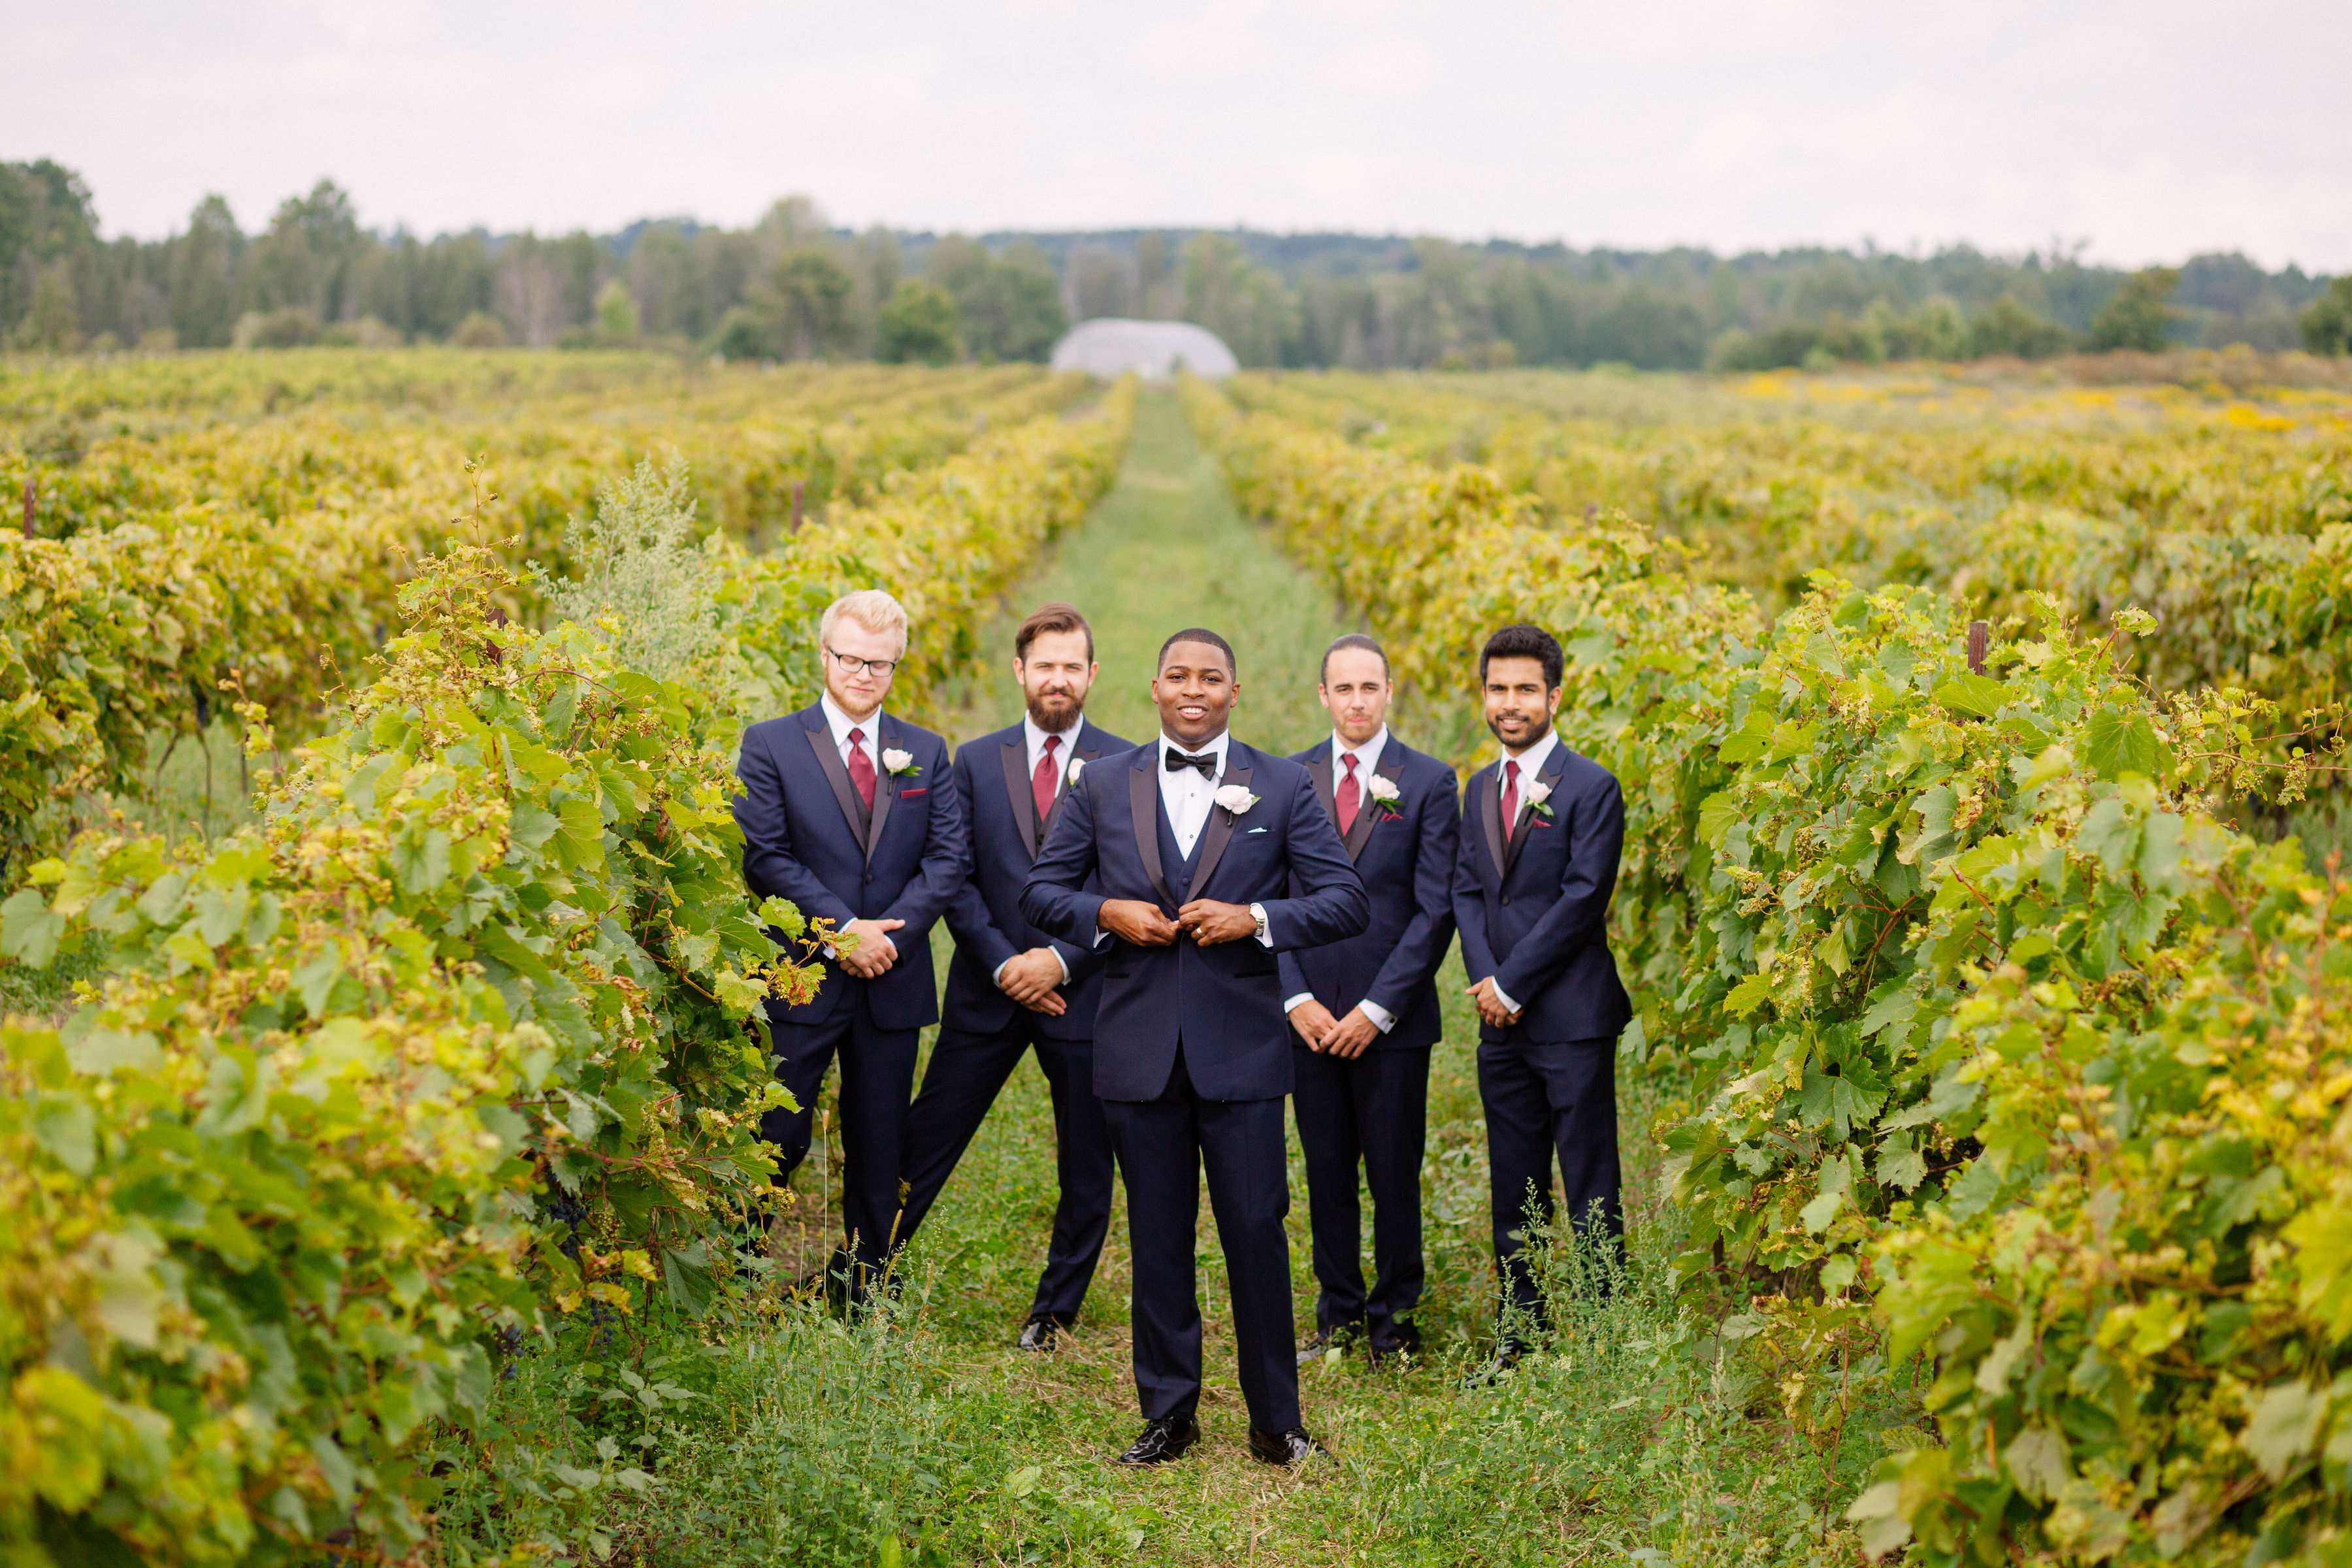 Groomsmen in navy suits at Willow springs winery in Markham ON